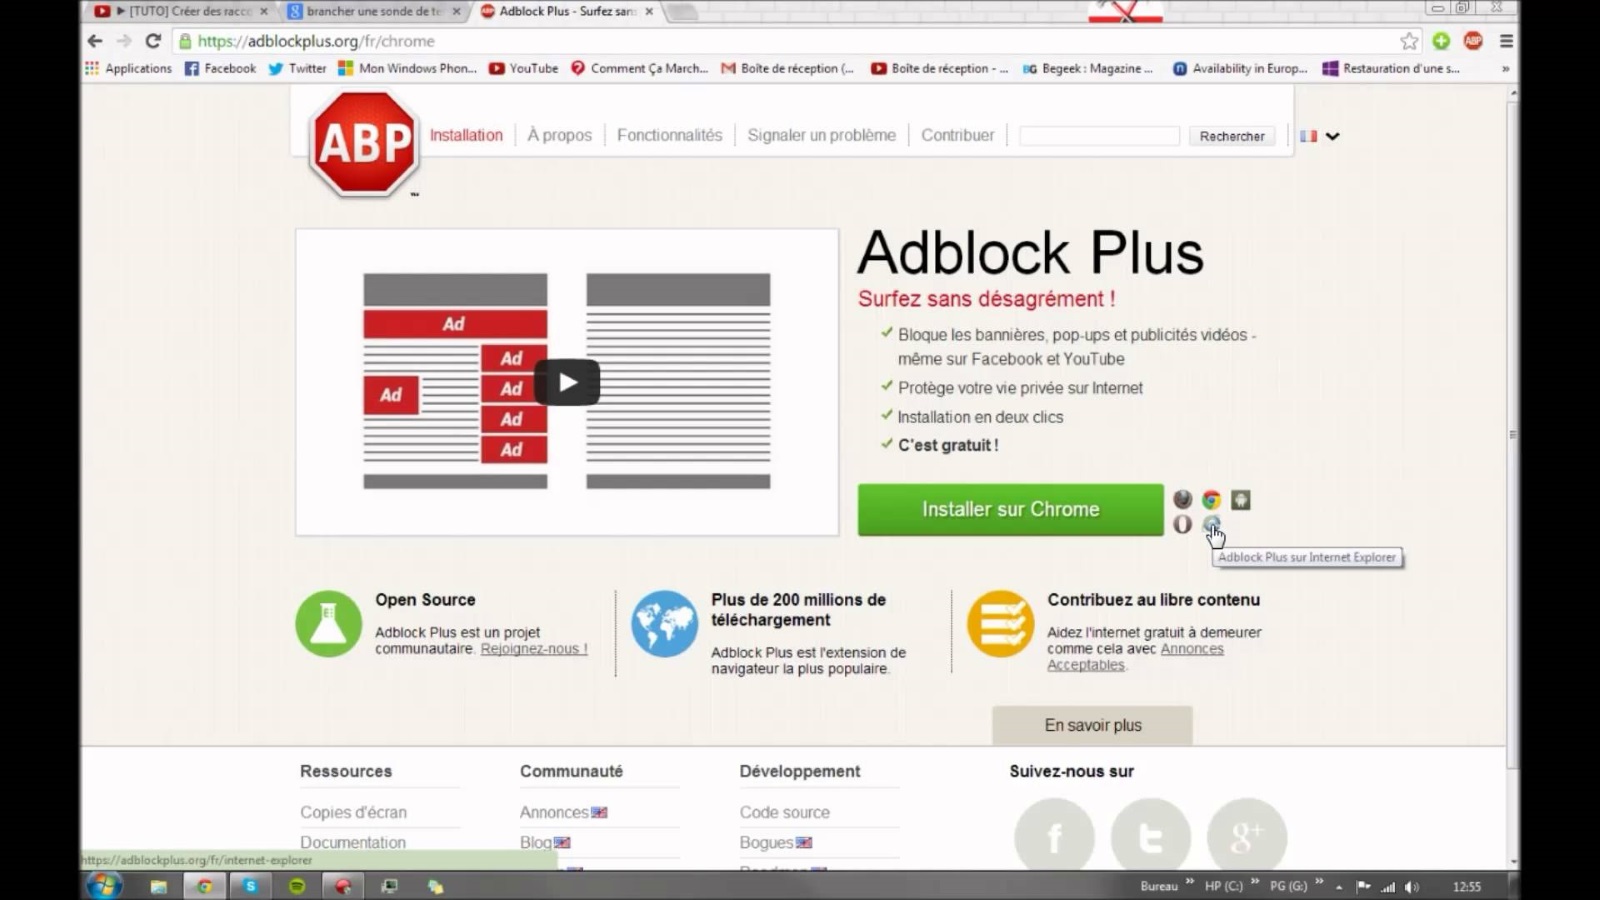 Google, Amazon, Microsoft and others paying Adblock Plus to show their ads